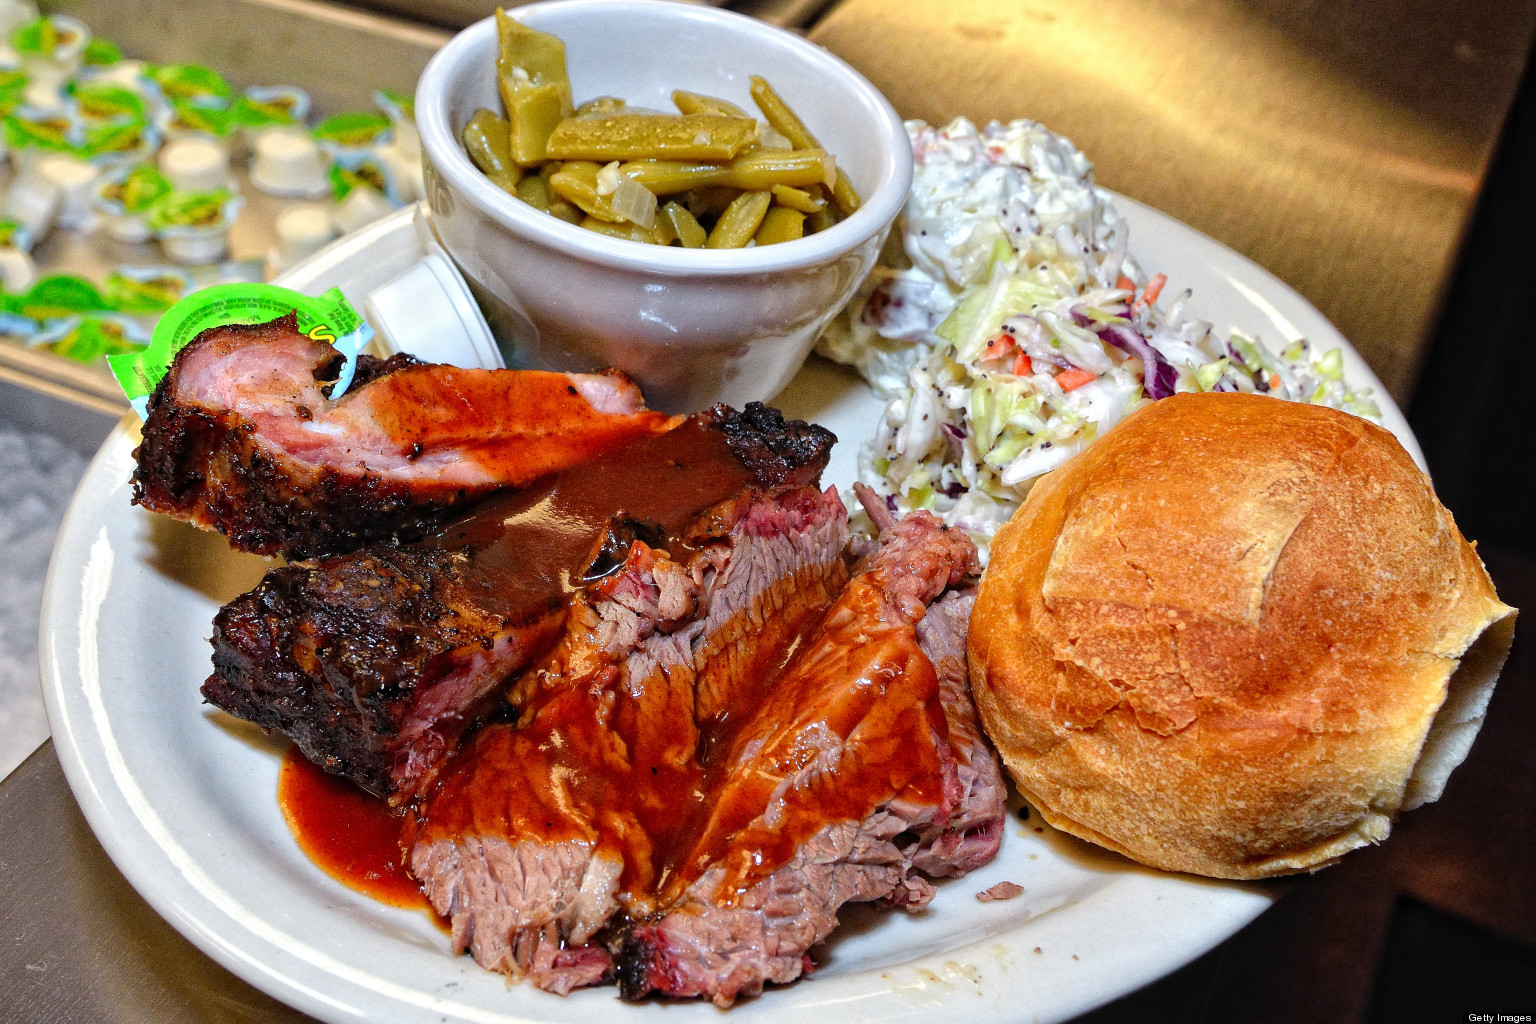 Traveling a little further south we have our fourth varietal of barbecue in the United States, coming out of Texas. Now there is a divide in Texas, when it comes to how to prepare different types of barbecue, focusing on Central Texas and East Texas.